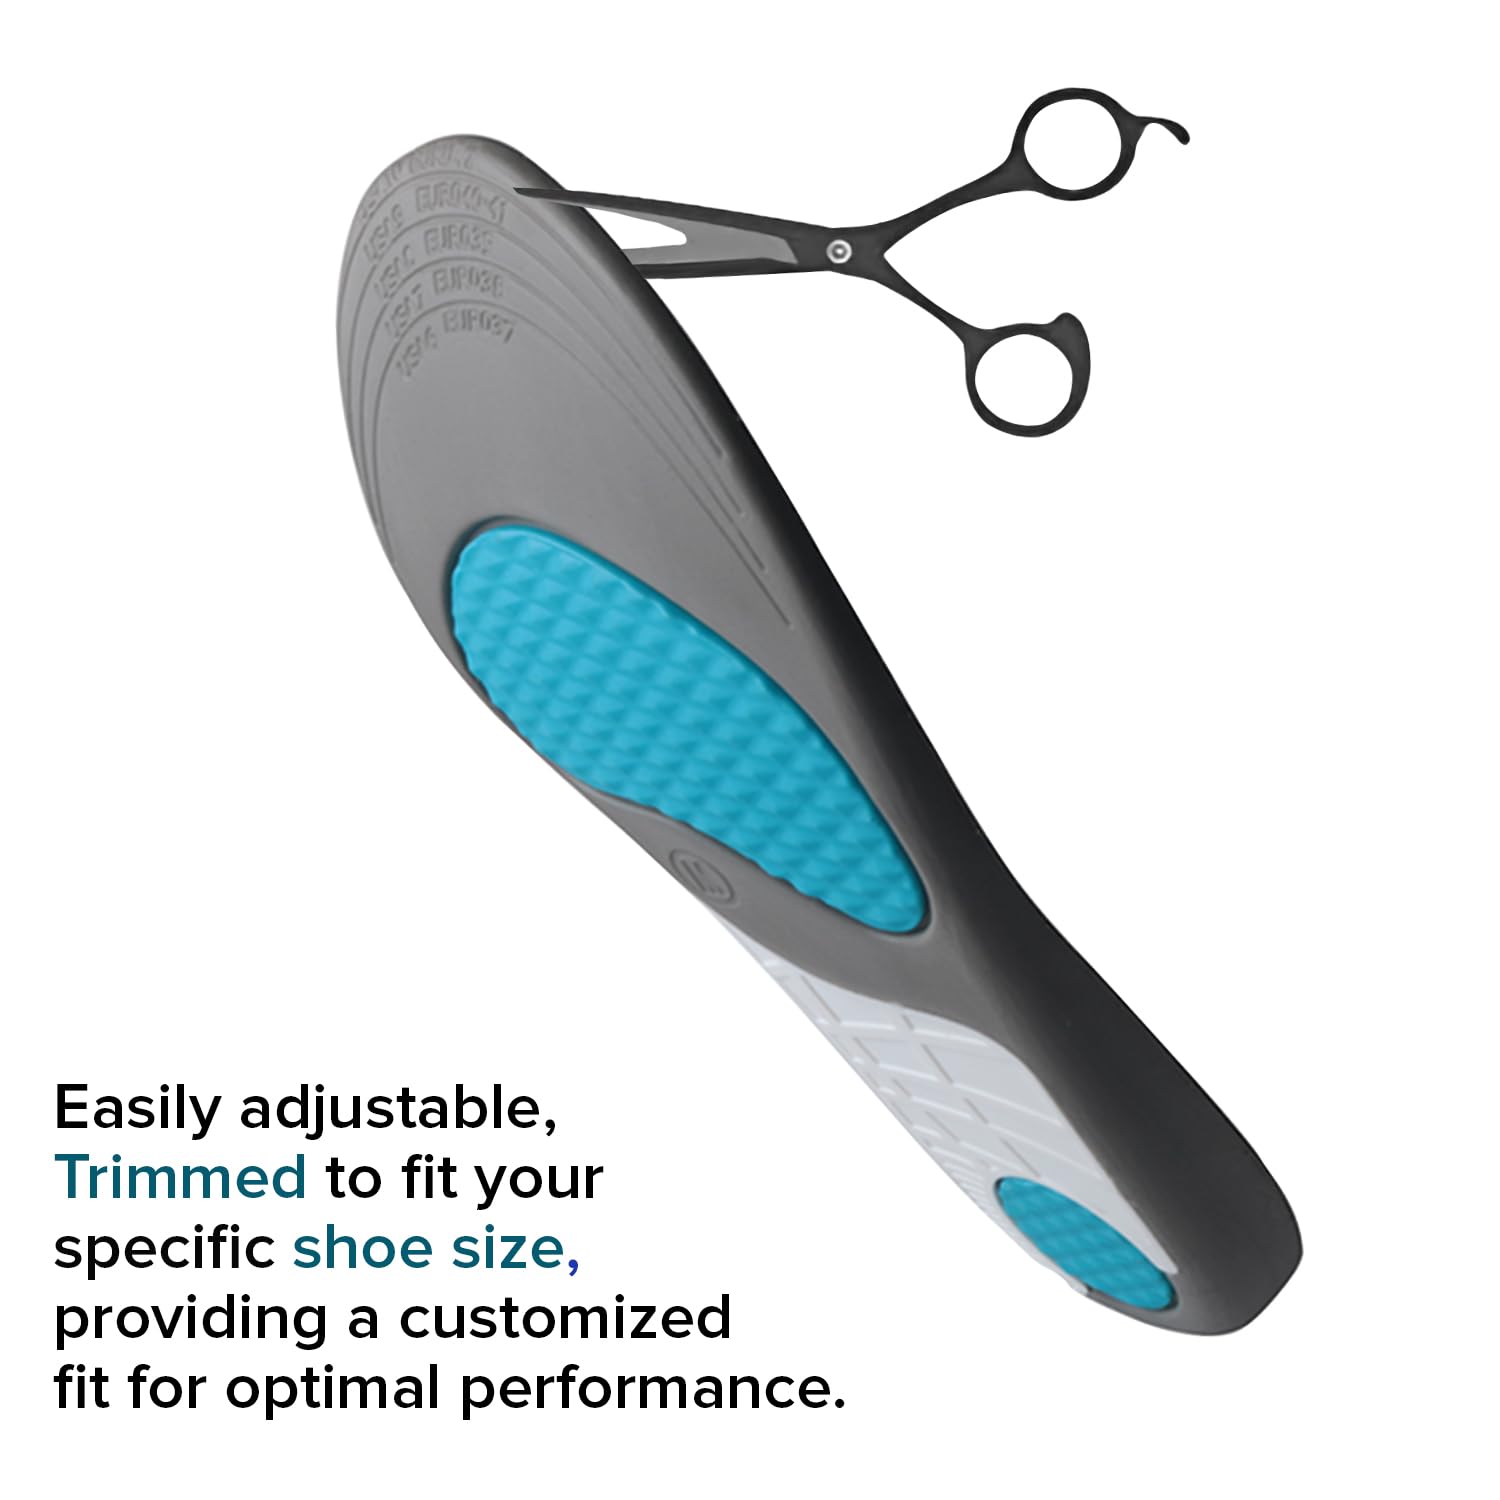 Dr Foot Sport Insole | Support Shock Absorption, Cushioning Sports | Enhance Performance and Comfort for Running, Hiking, Working | Fits Running Shoes | For Men & Women - 1 Pair (Medium Size)